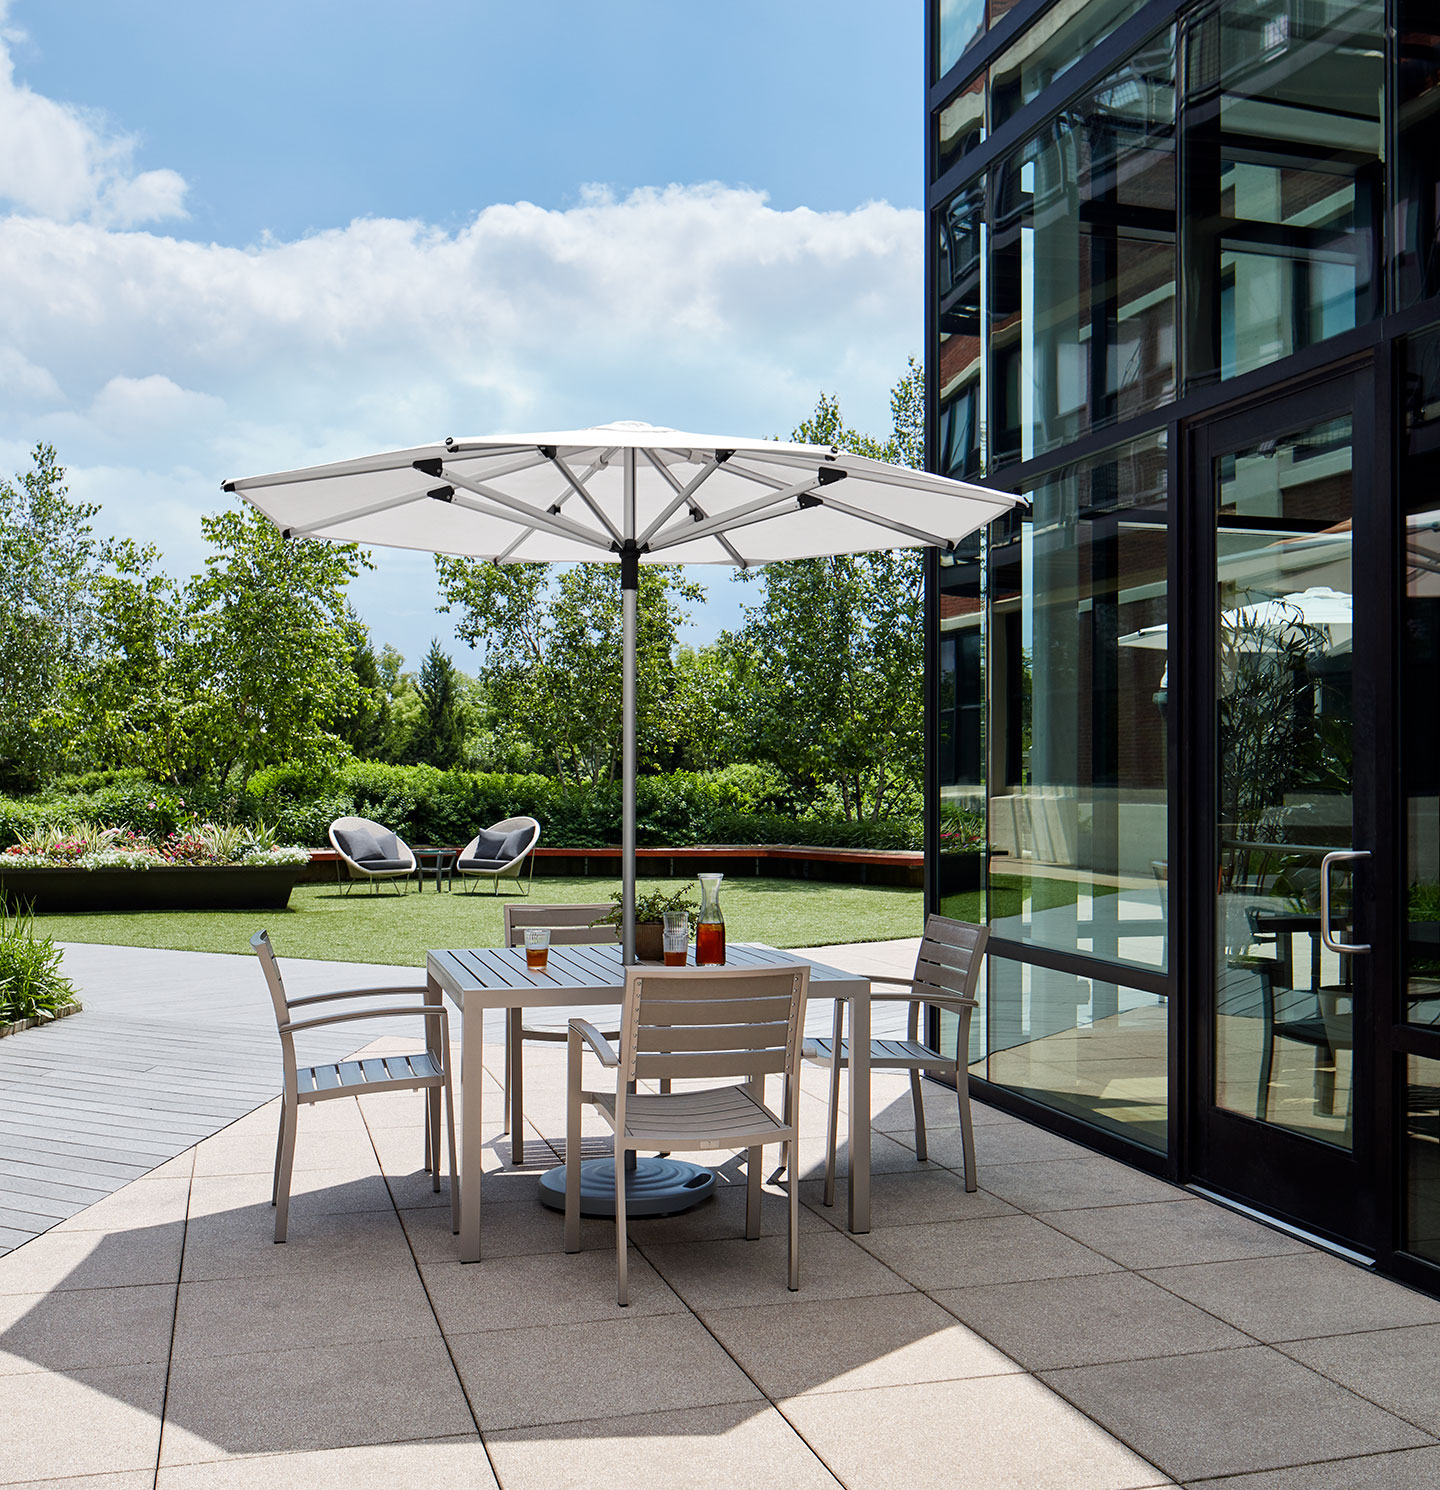 Haworth Janus Titan Umbrella Accessories in outdoor office seating area covering a table next to glass building 